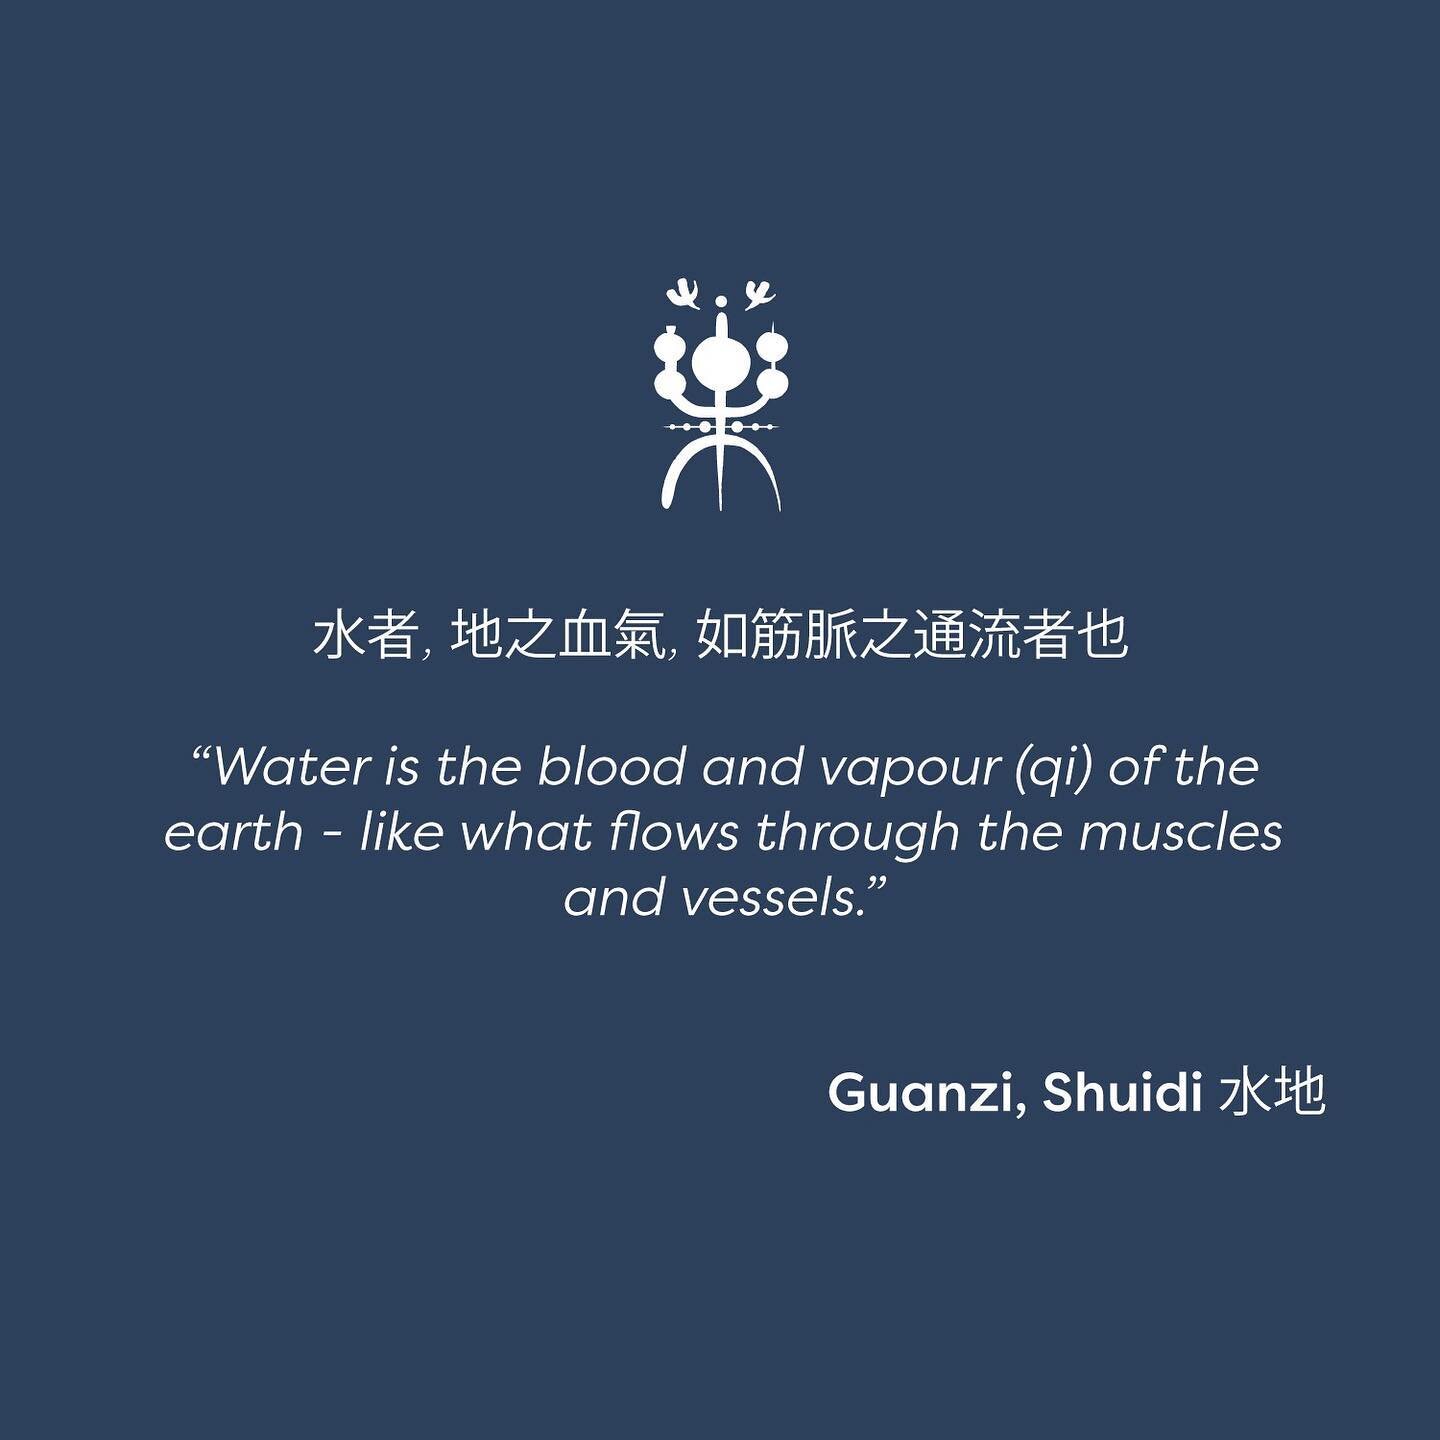 Qi, blood, and a pathway: all that is needed for the study of physiology. Water and a pathway: all that is needed for the study of hydrology. Written around the 3rd century BCE, the Guanzi Shuidi gives us the earliest extant look at the importance of